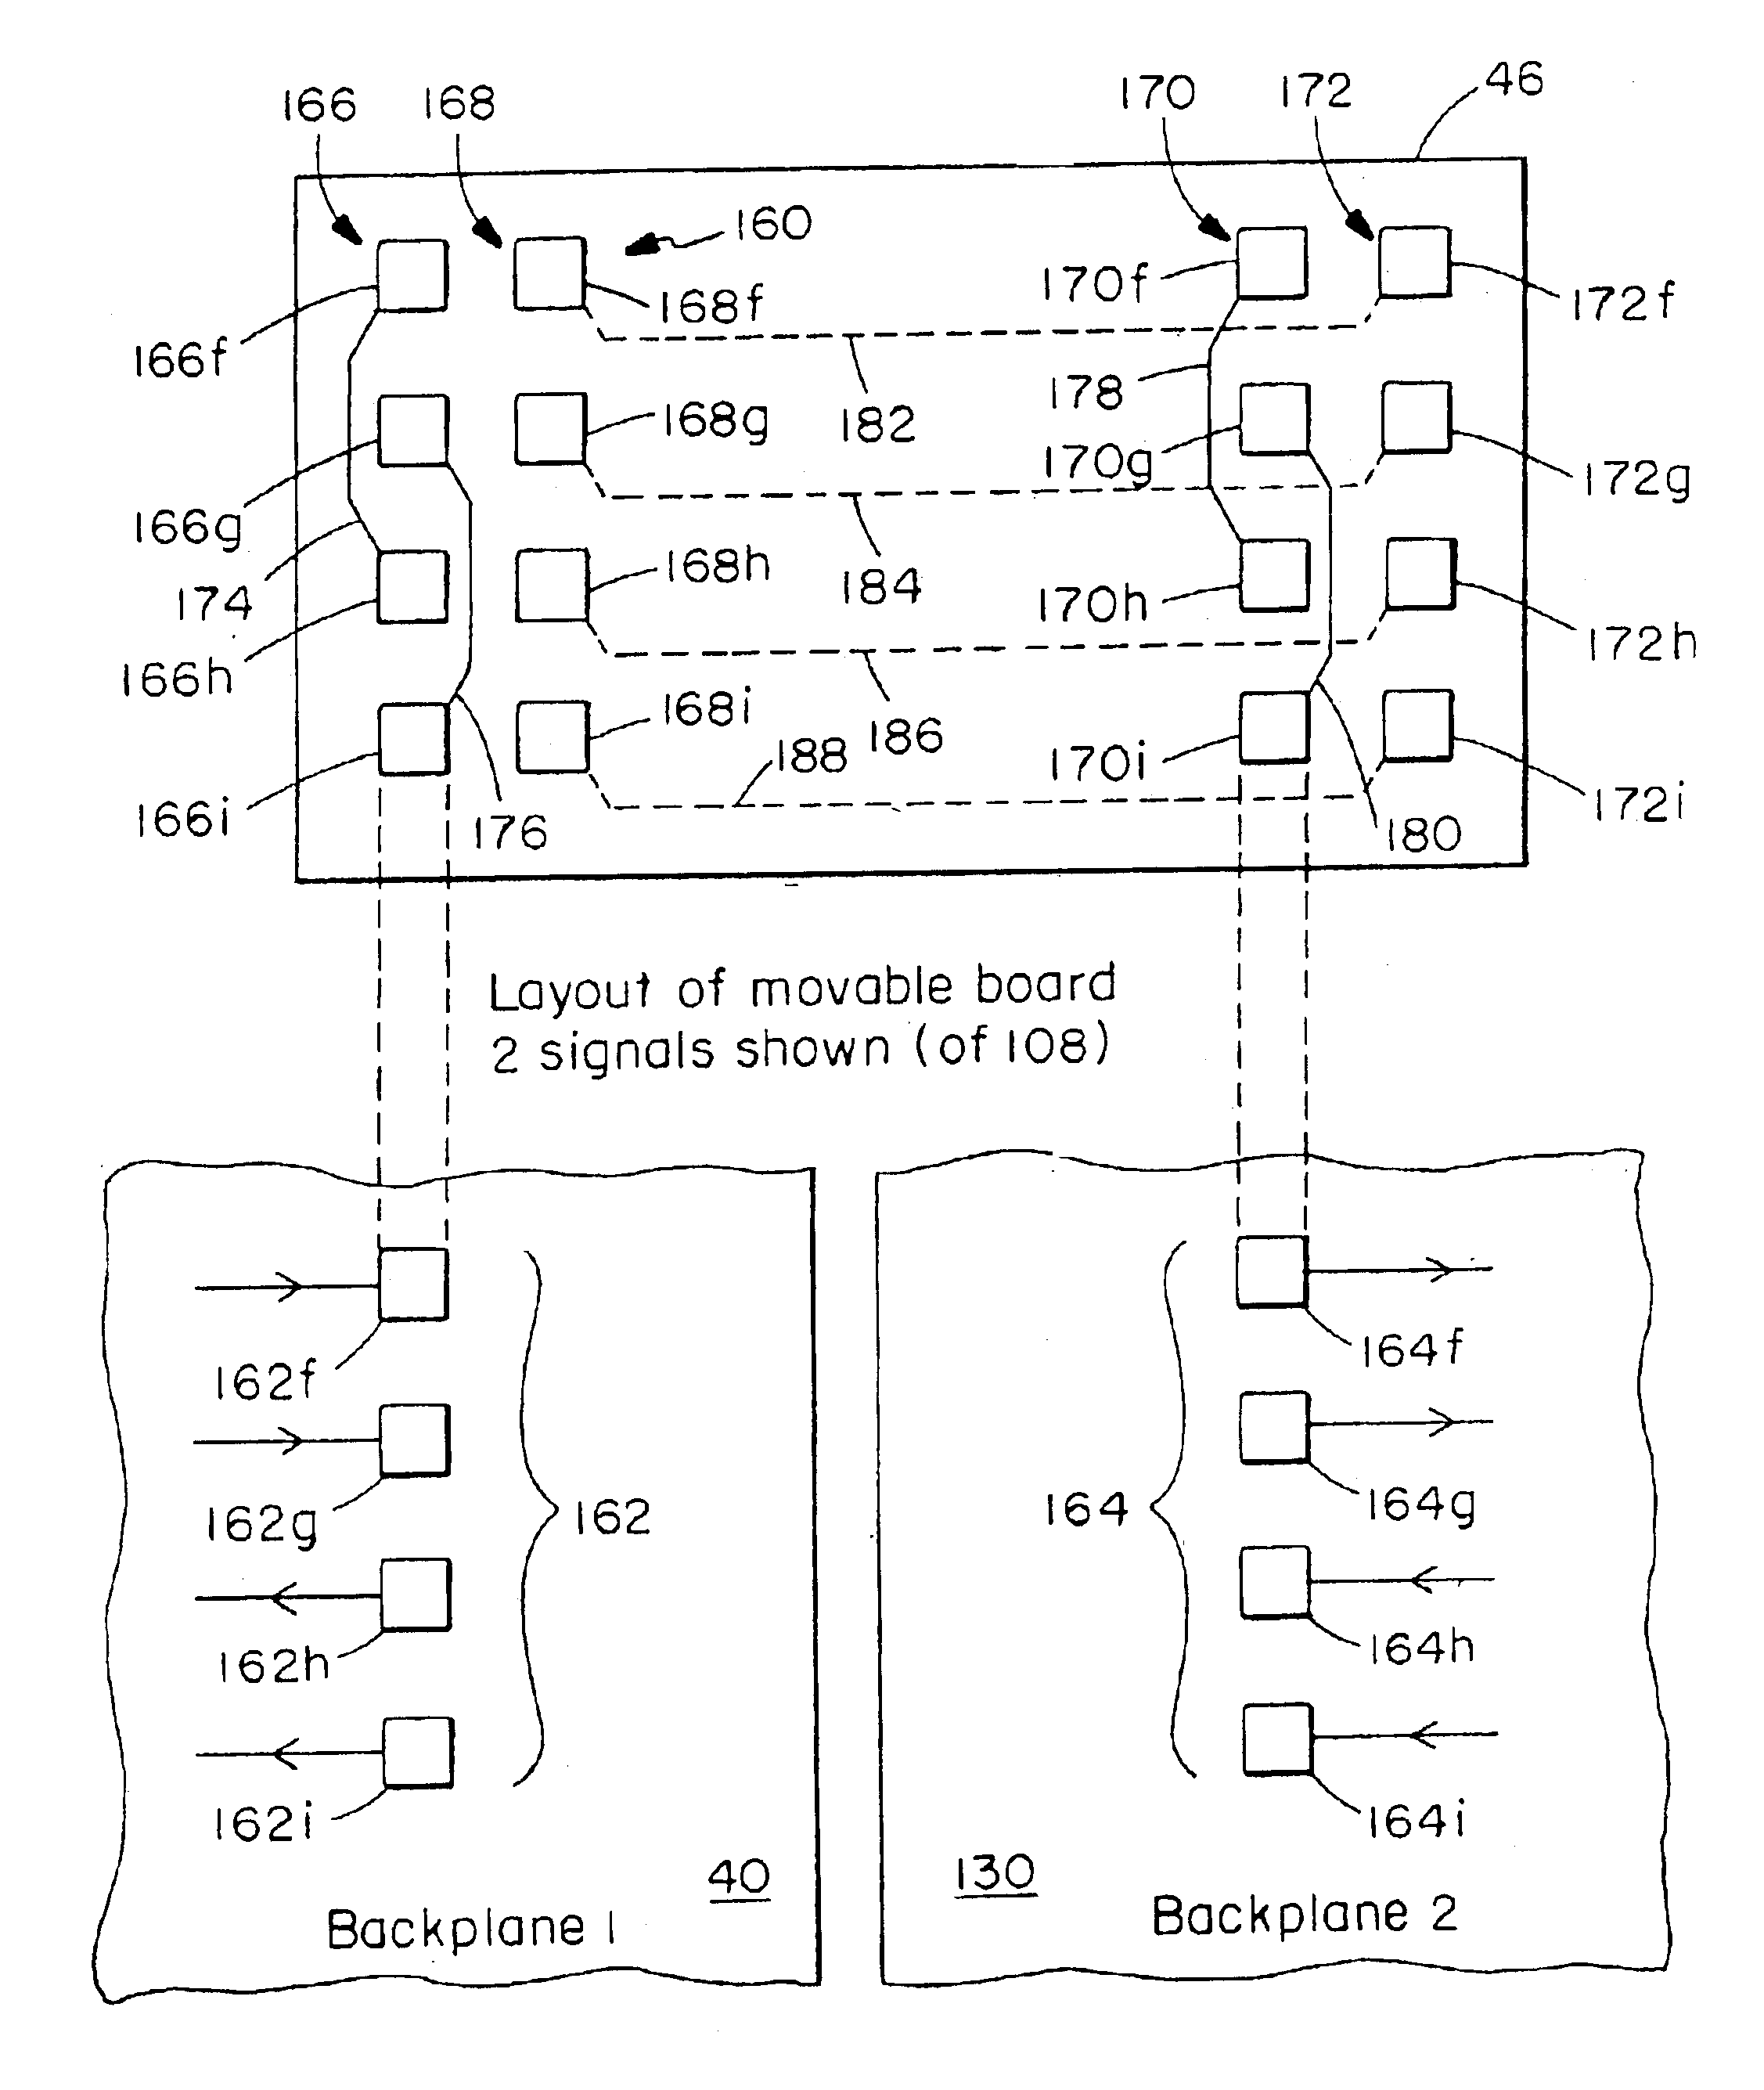 Apparatus and methods for connecting modules using remote switching